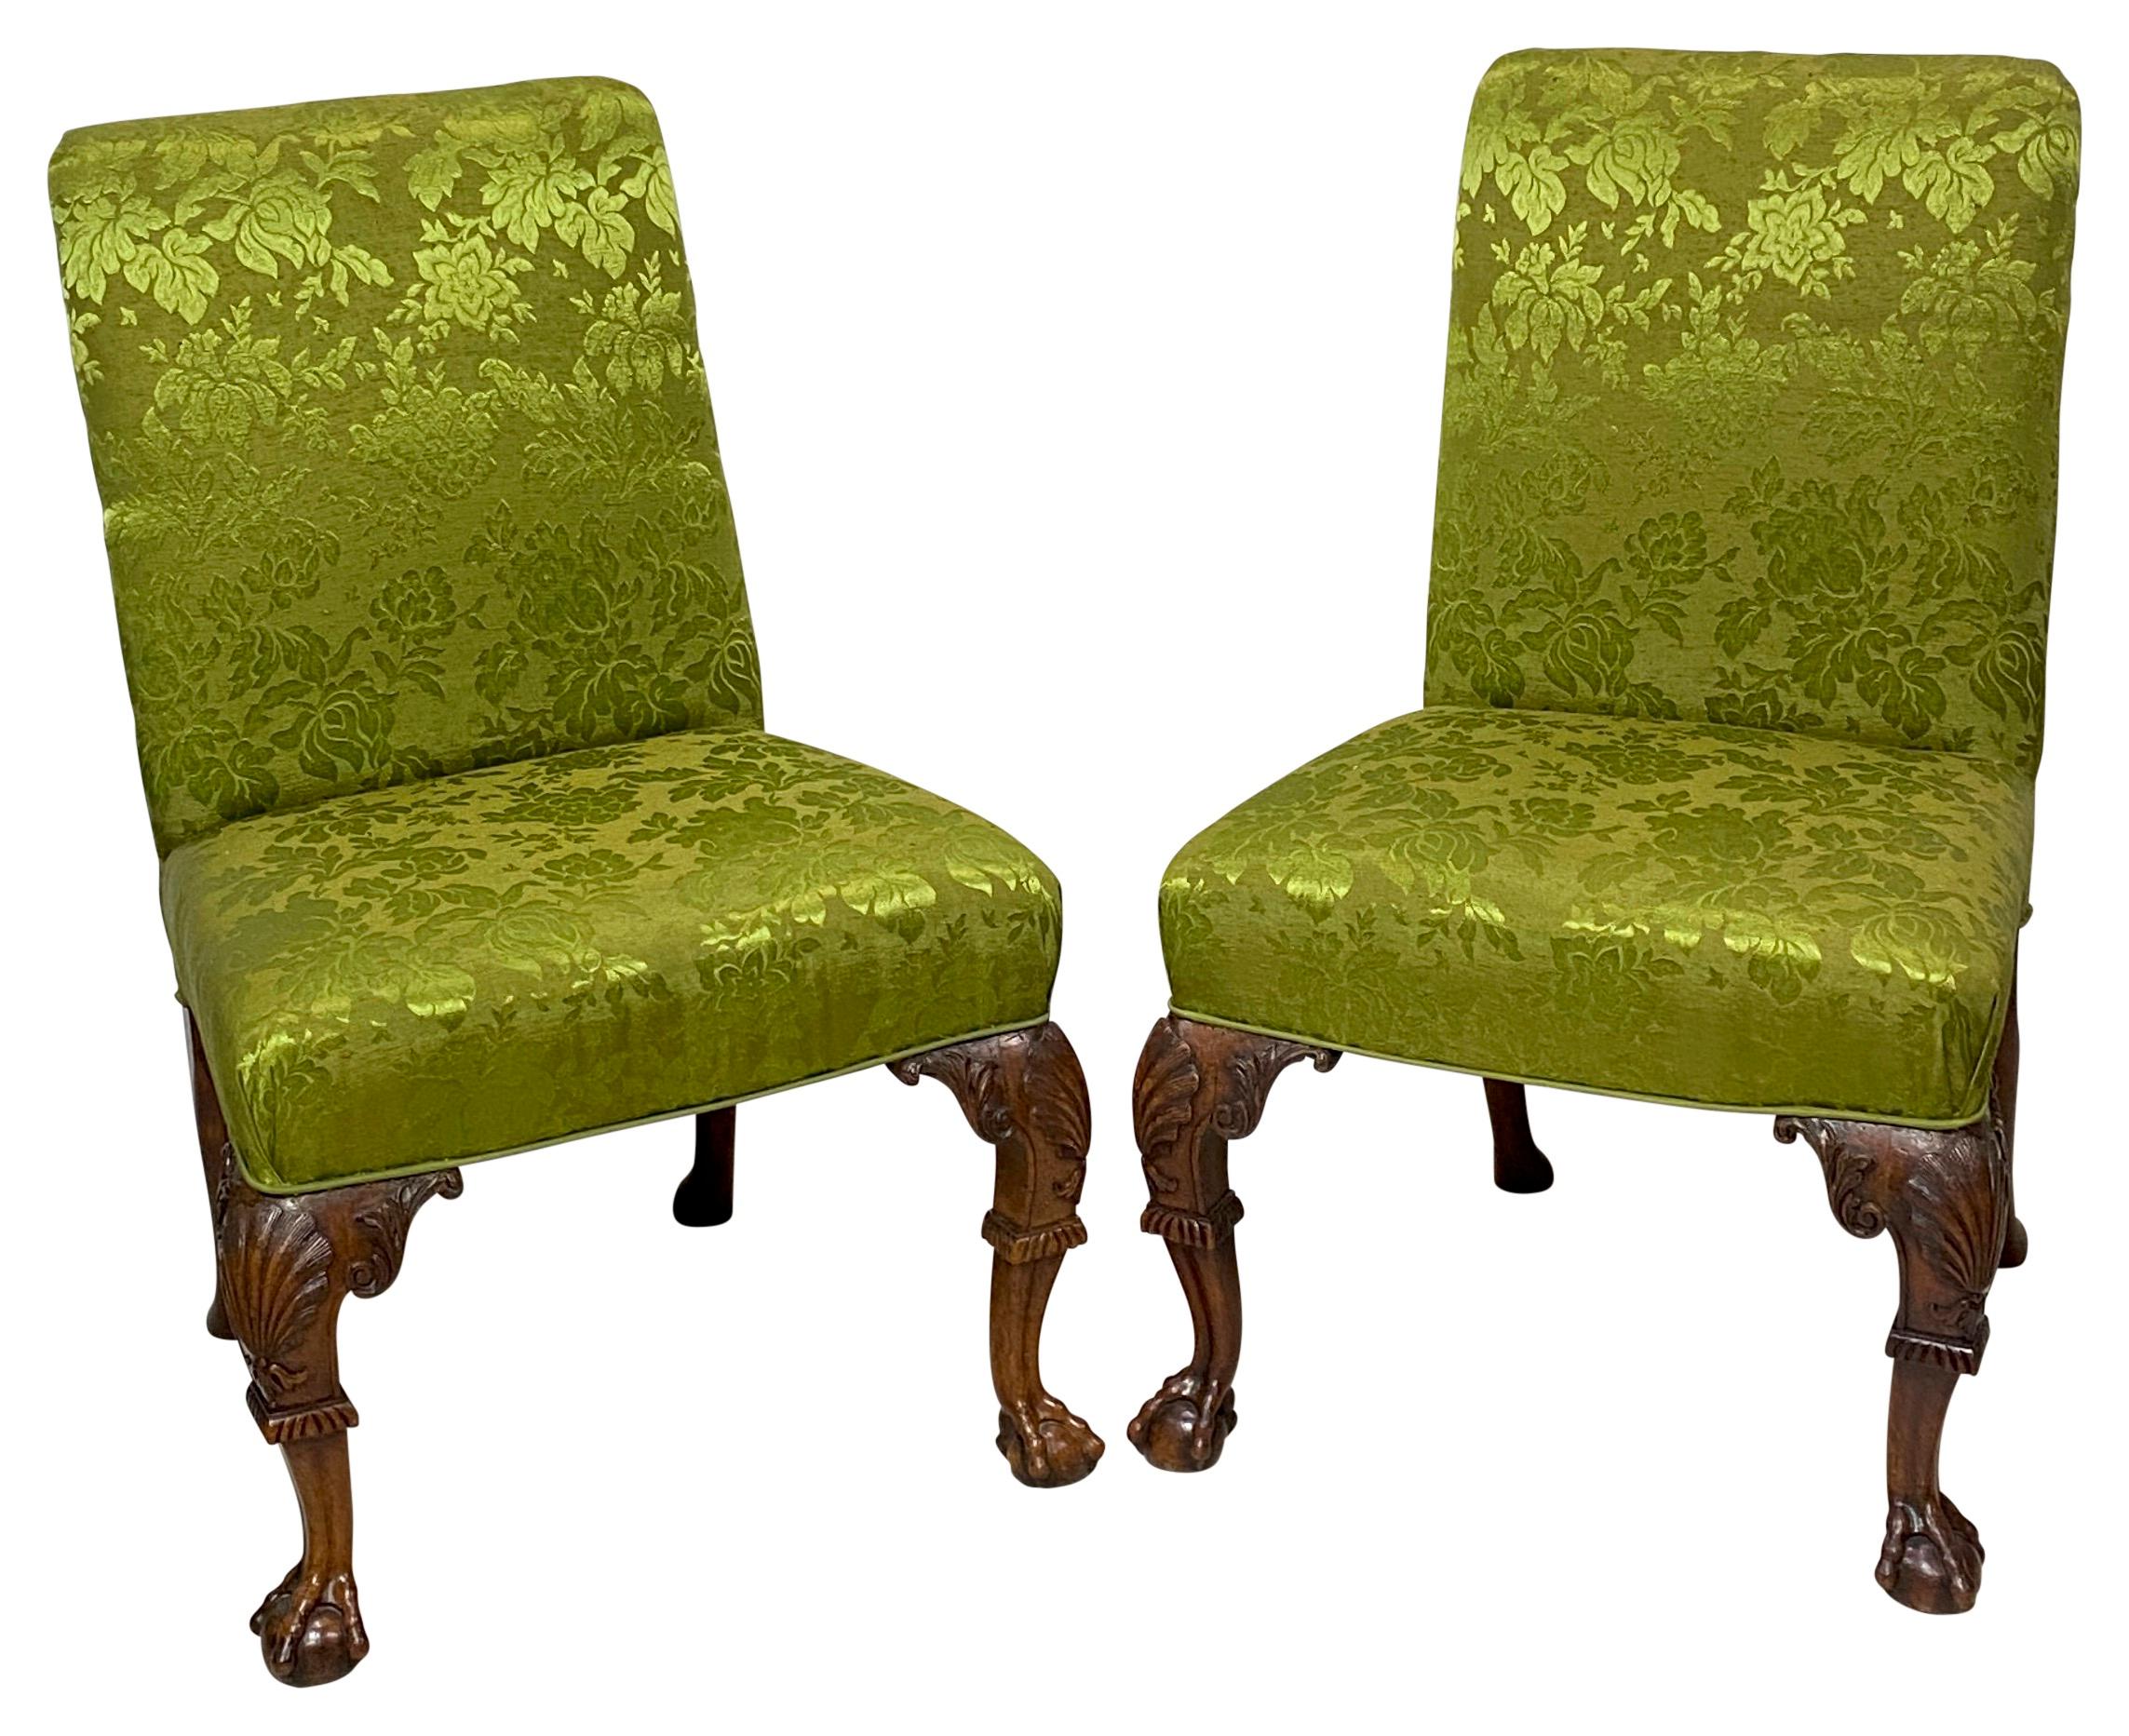 Pair of Exceptional 18th Century English Chippendale Mahogany Side Chairs In Good Condition For Sale In San Francisco, CA